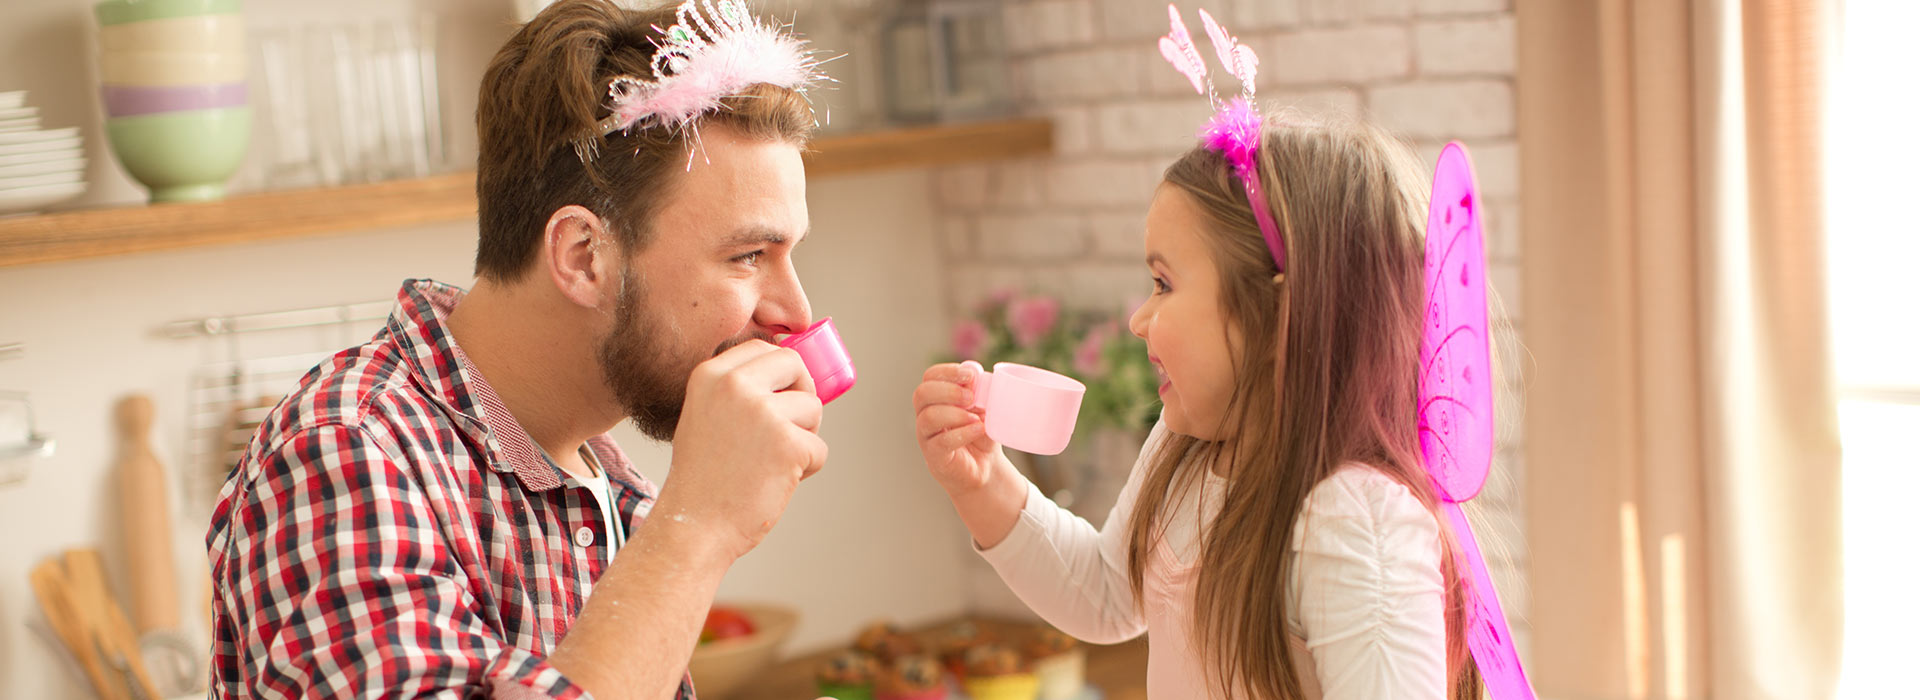 Little girl and dad dressed up drinking tea